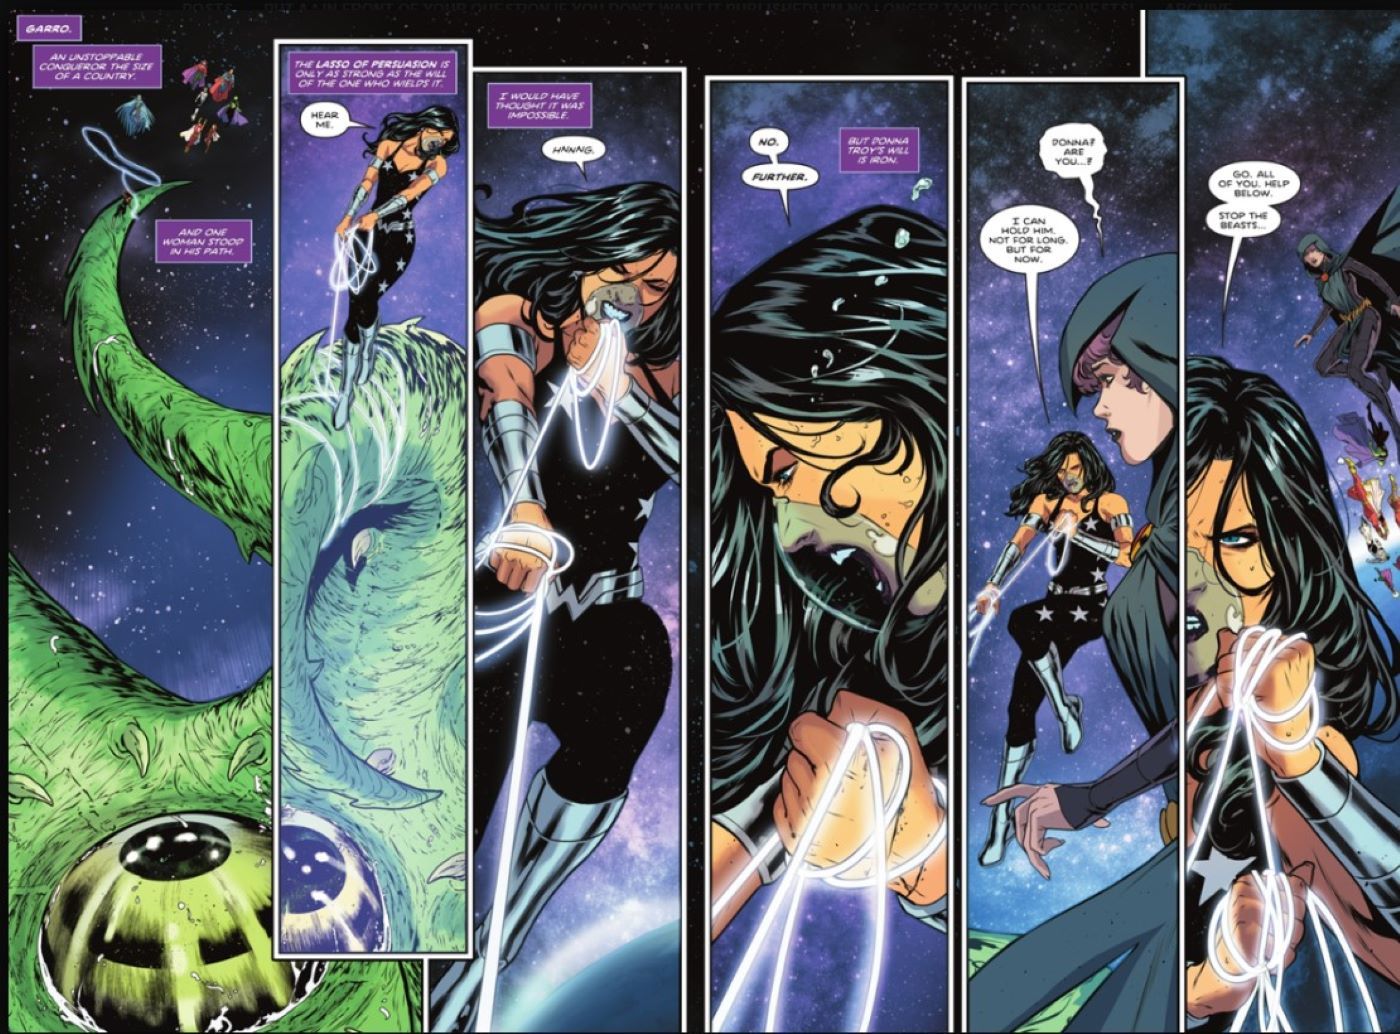 With 1 New Feat, DC Icon Donna Troy Makes Green Lantern Look Weak